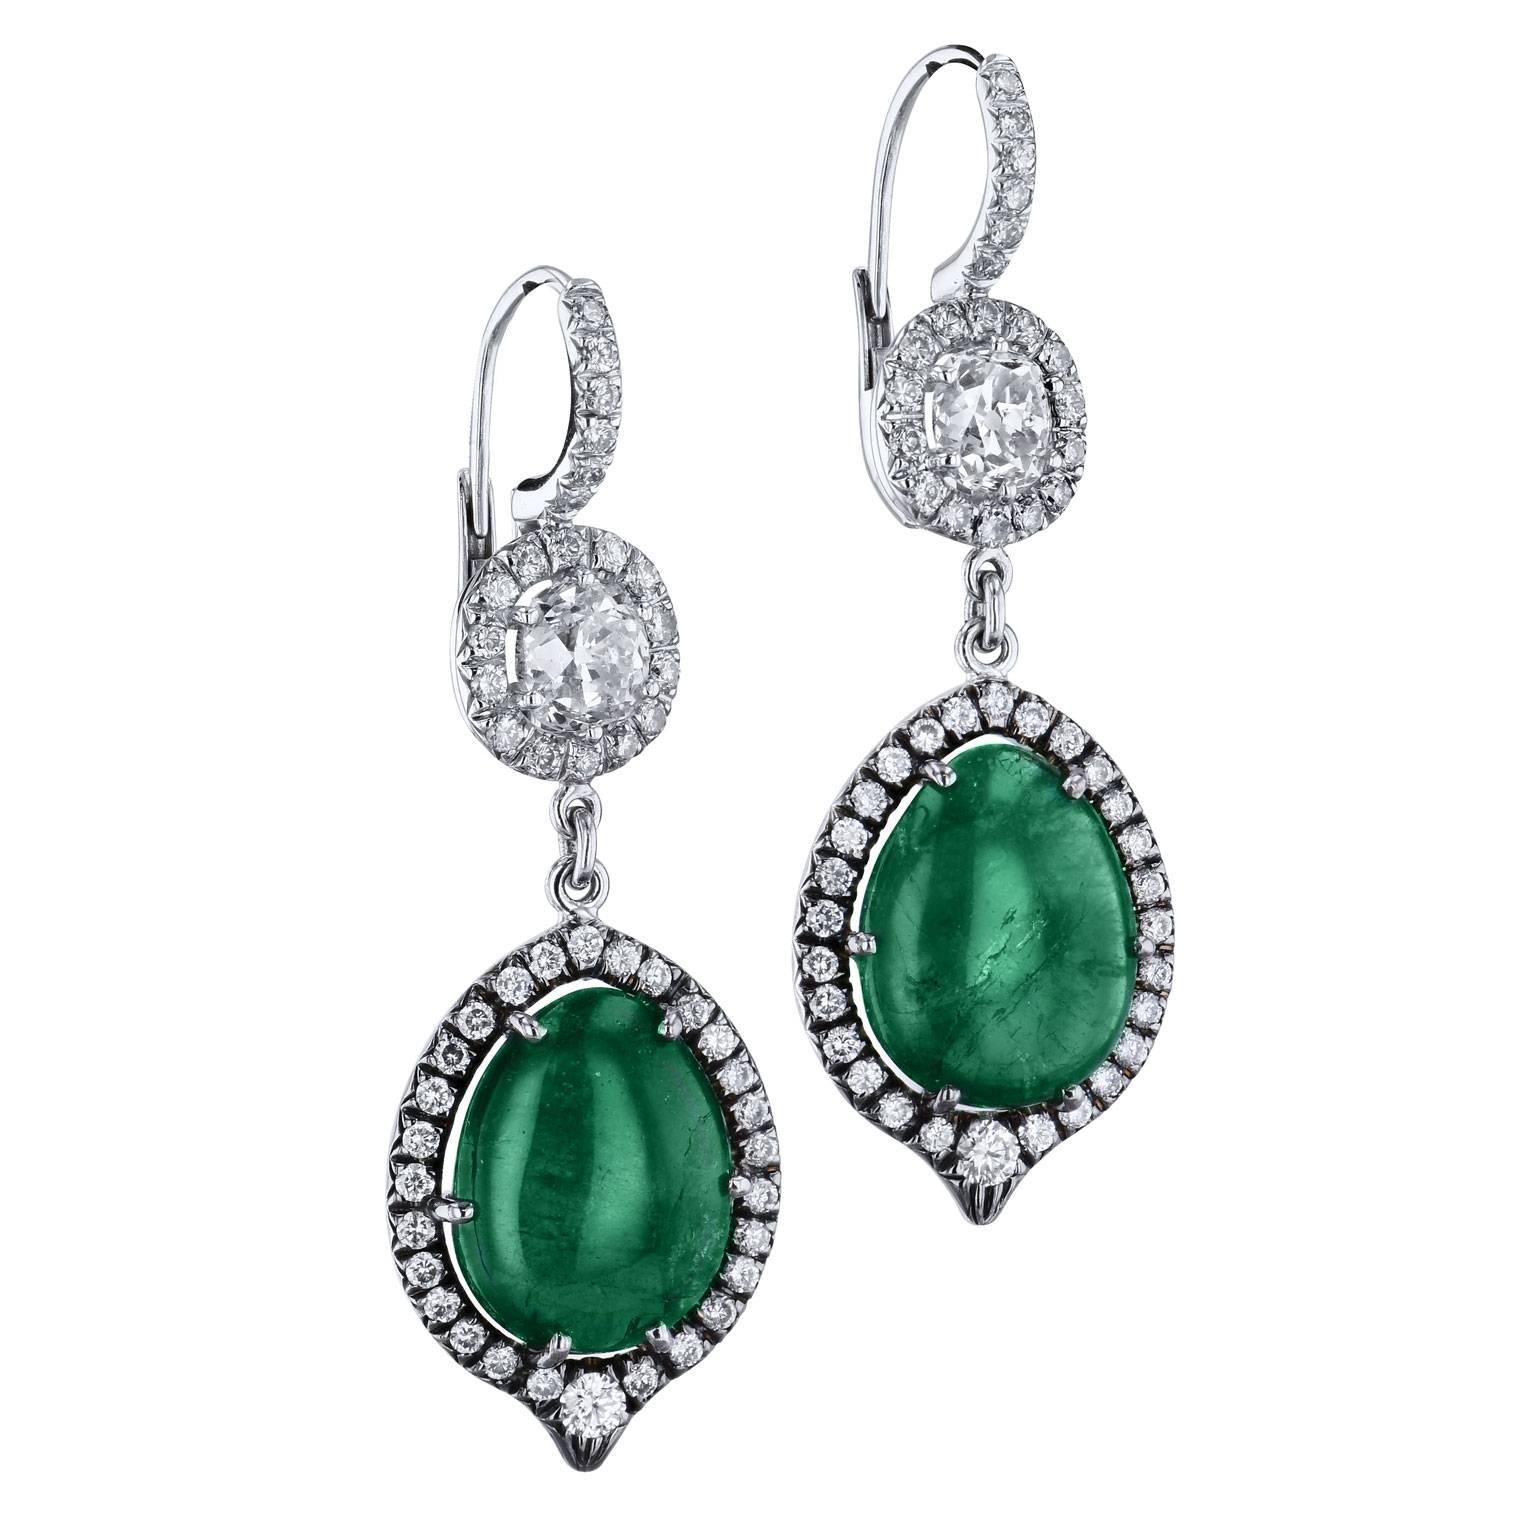 15.64 Carat Zambian Tear Drop Emerald and 1.05 carat of Diamond Earrings 18 kt

These stunning earrings are one of a kind and handmade by H&H Jewels. 

Like two deep green oases, 15.64 carat of teardrop cabochon Zambian emerald are prong-set below